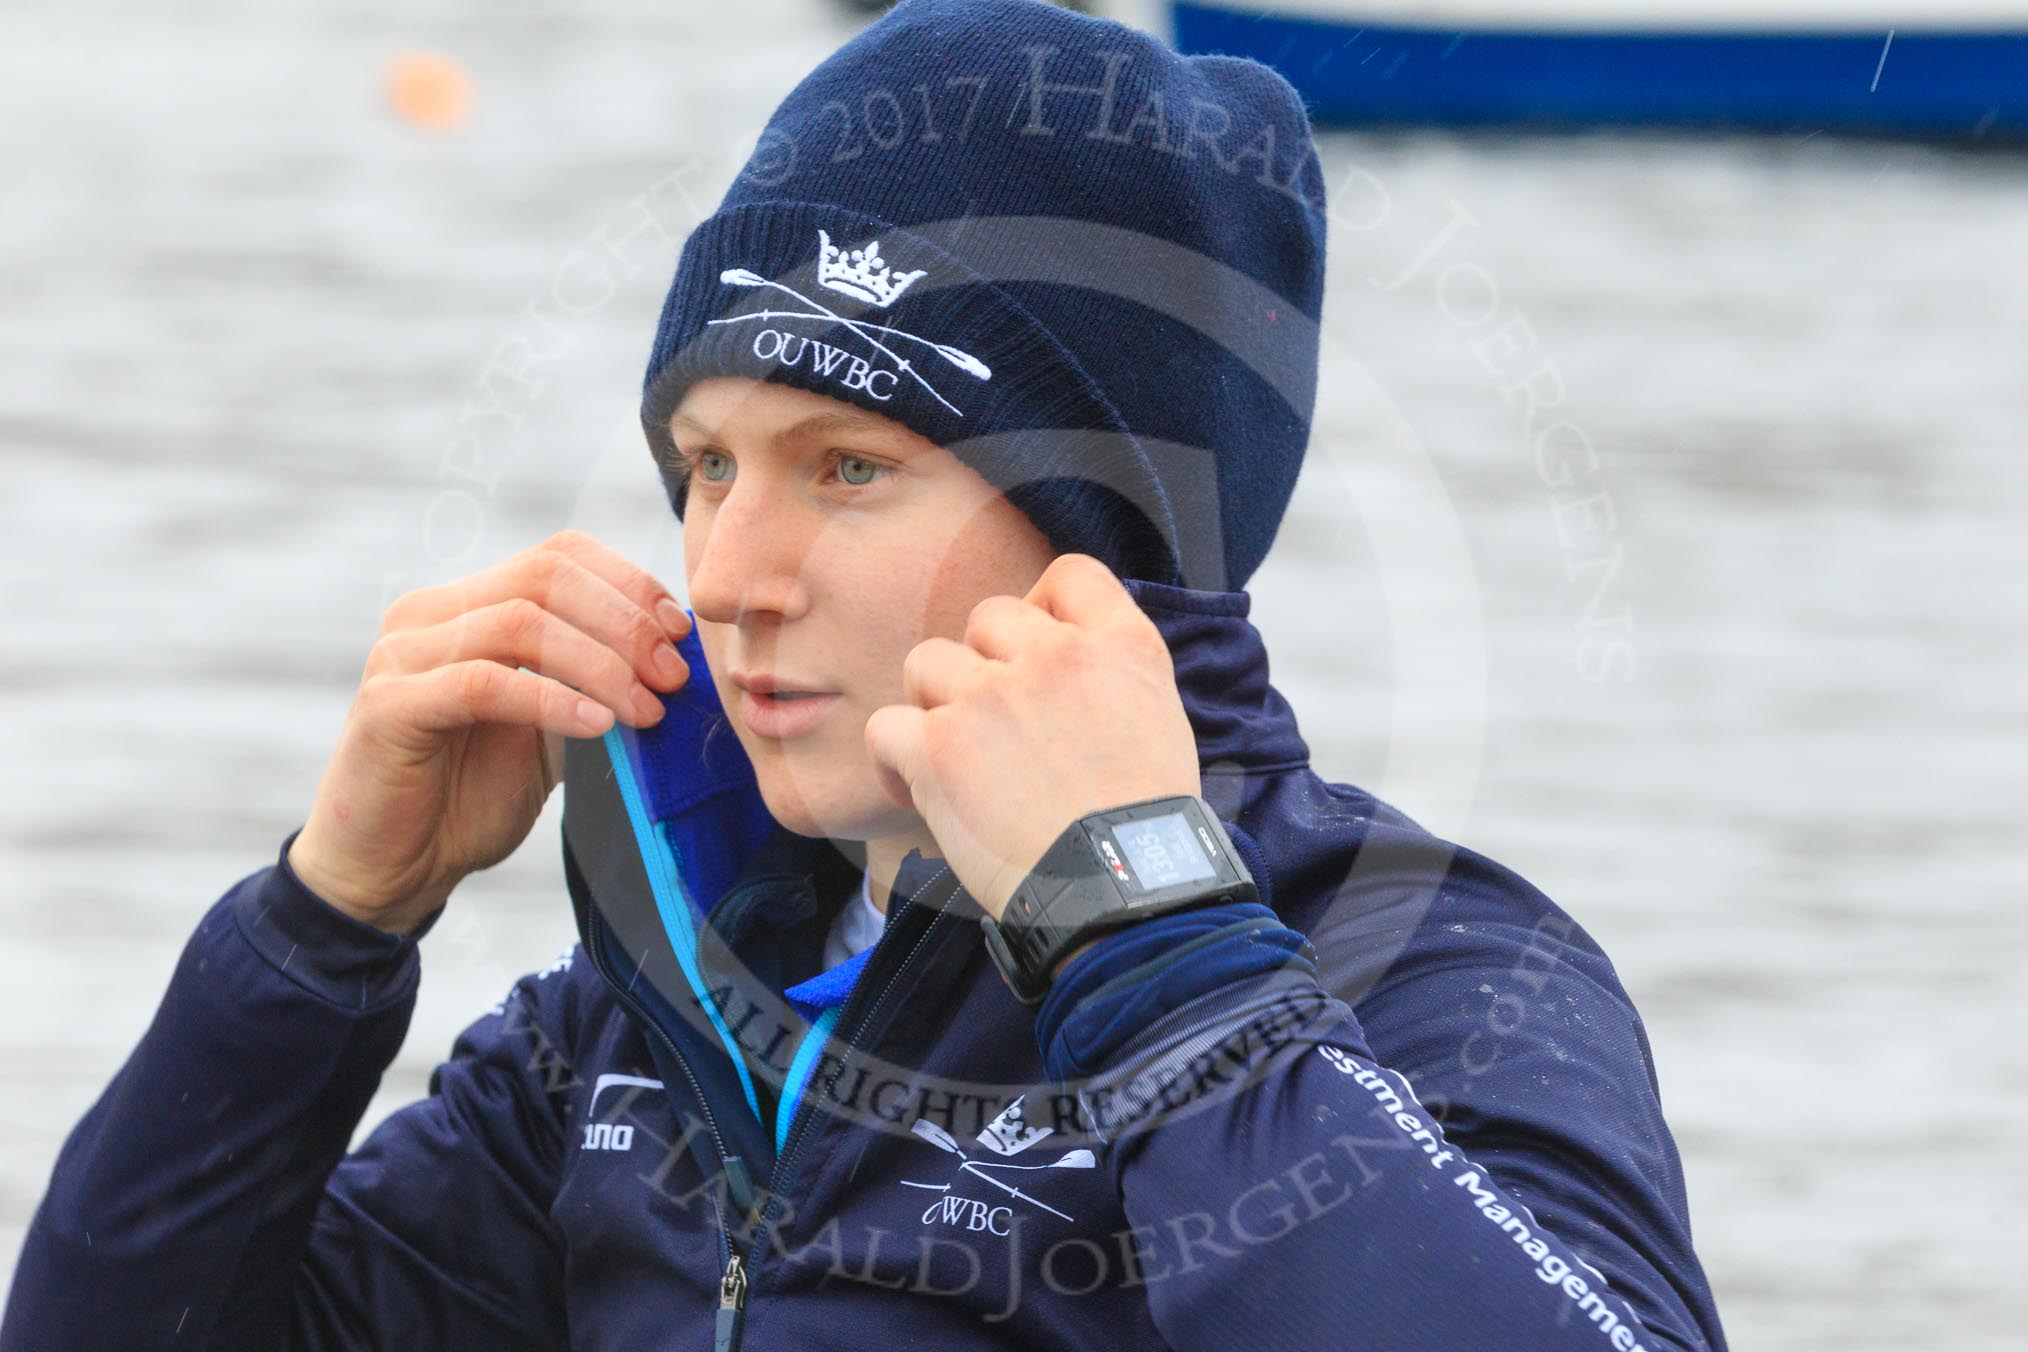 The Women's Boat Race season 2018 - fixture OUWBC vs. Molesey BC: OUWBC stroke Beth Bridgman.
River Thames between Putney Bridge and Mortlake,
London SW15,

United Kingdom,
on 04 March 2018 at 13:05, image #6